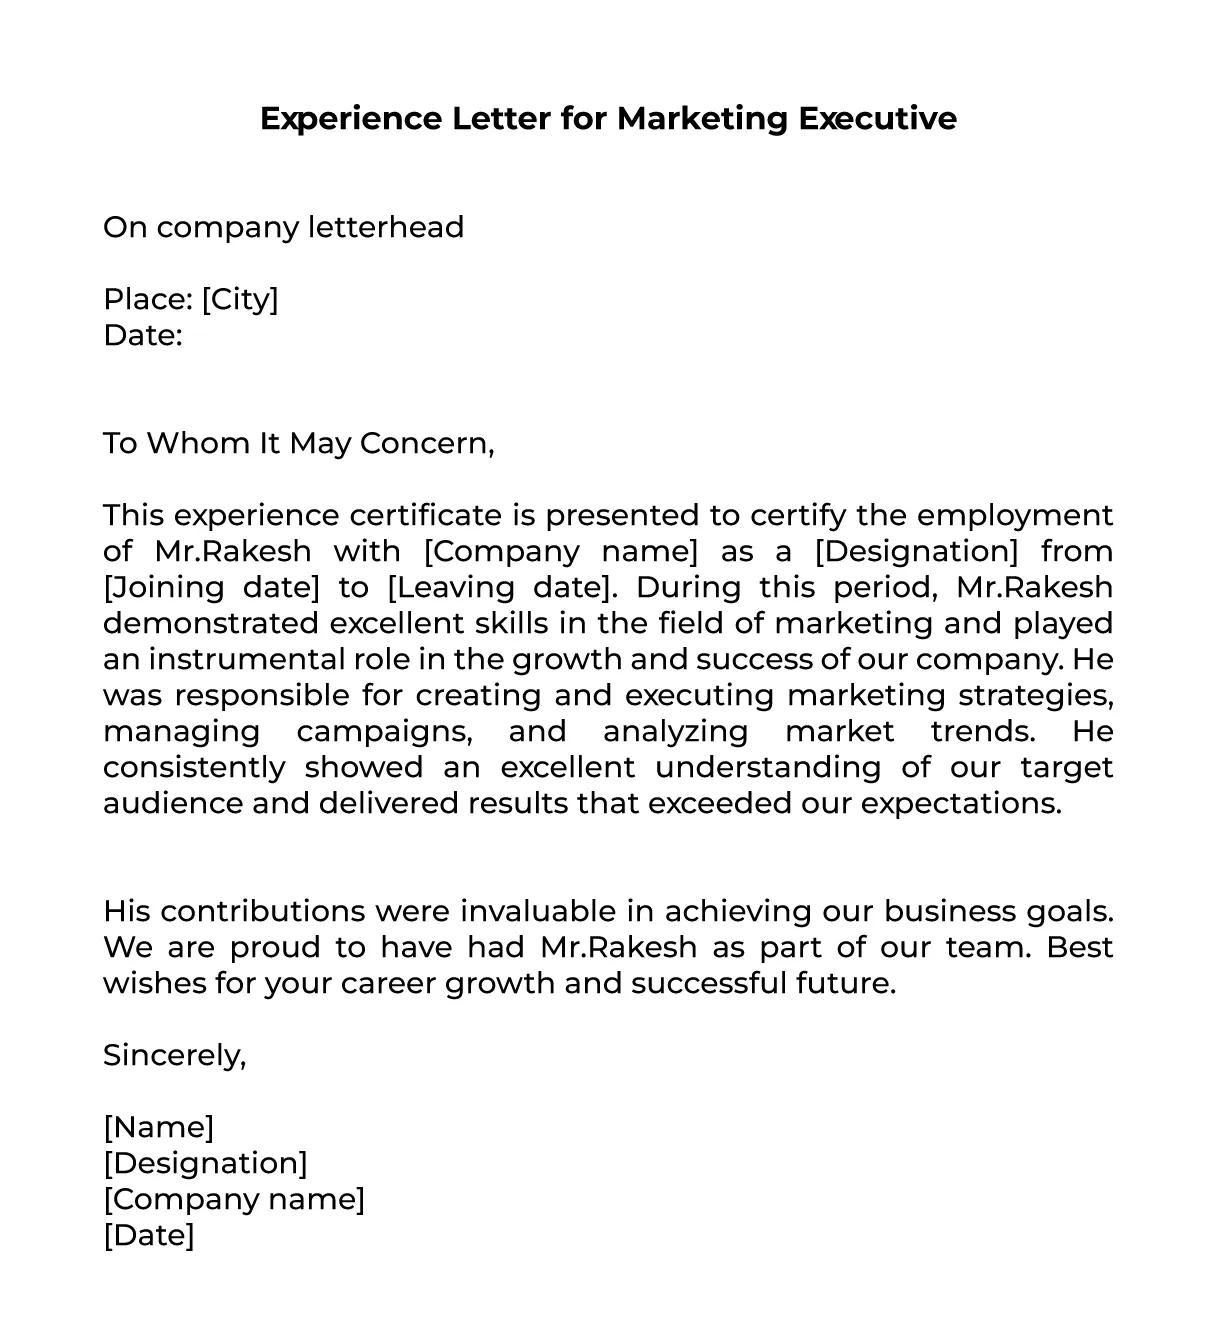 work experience letter sample pdf